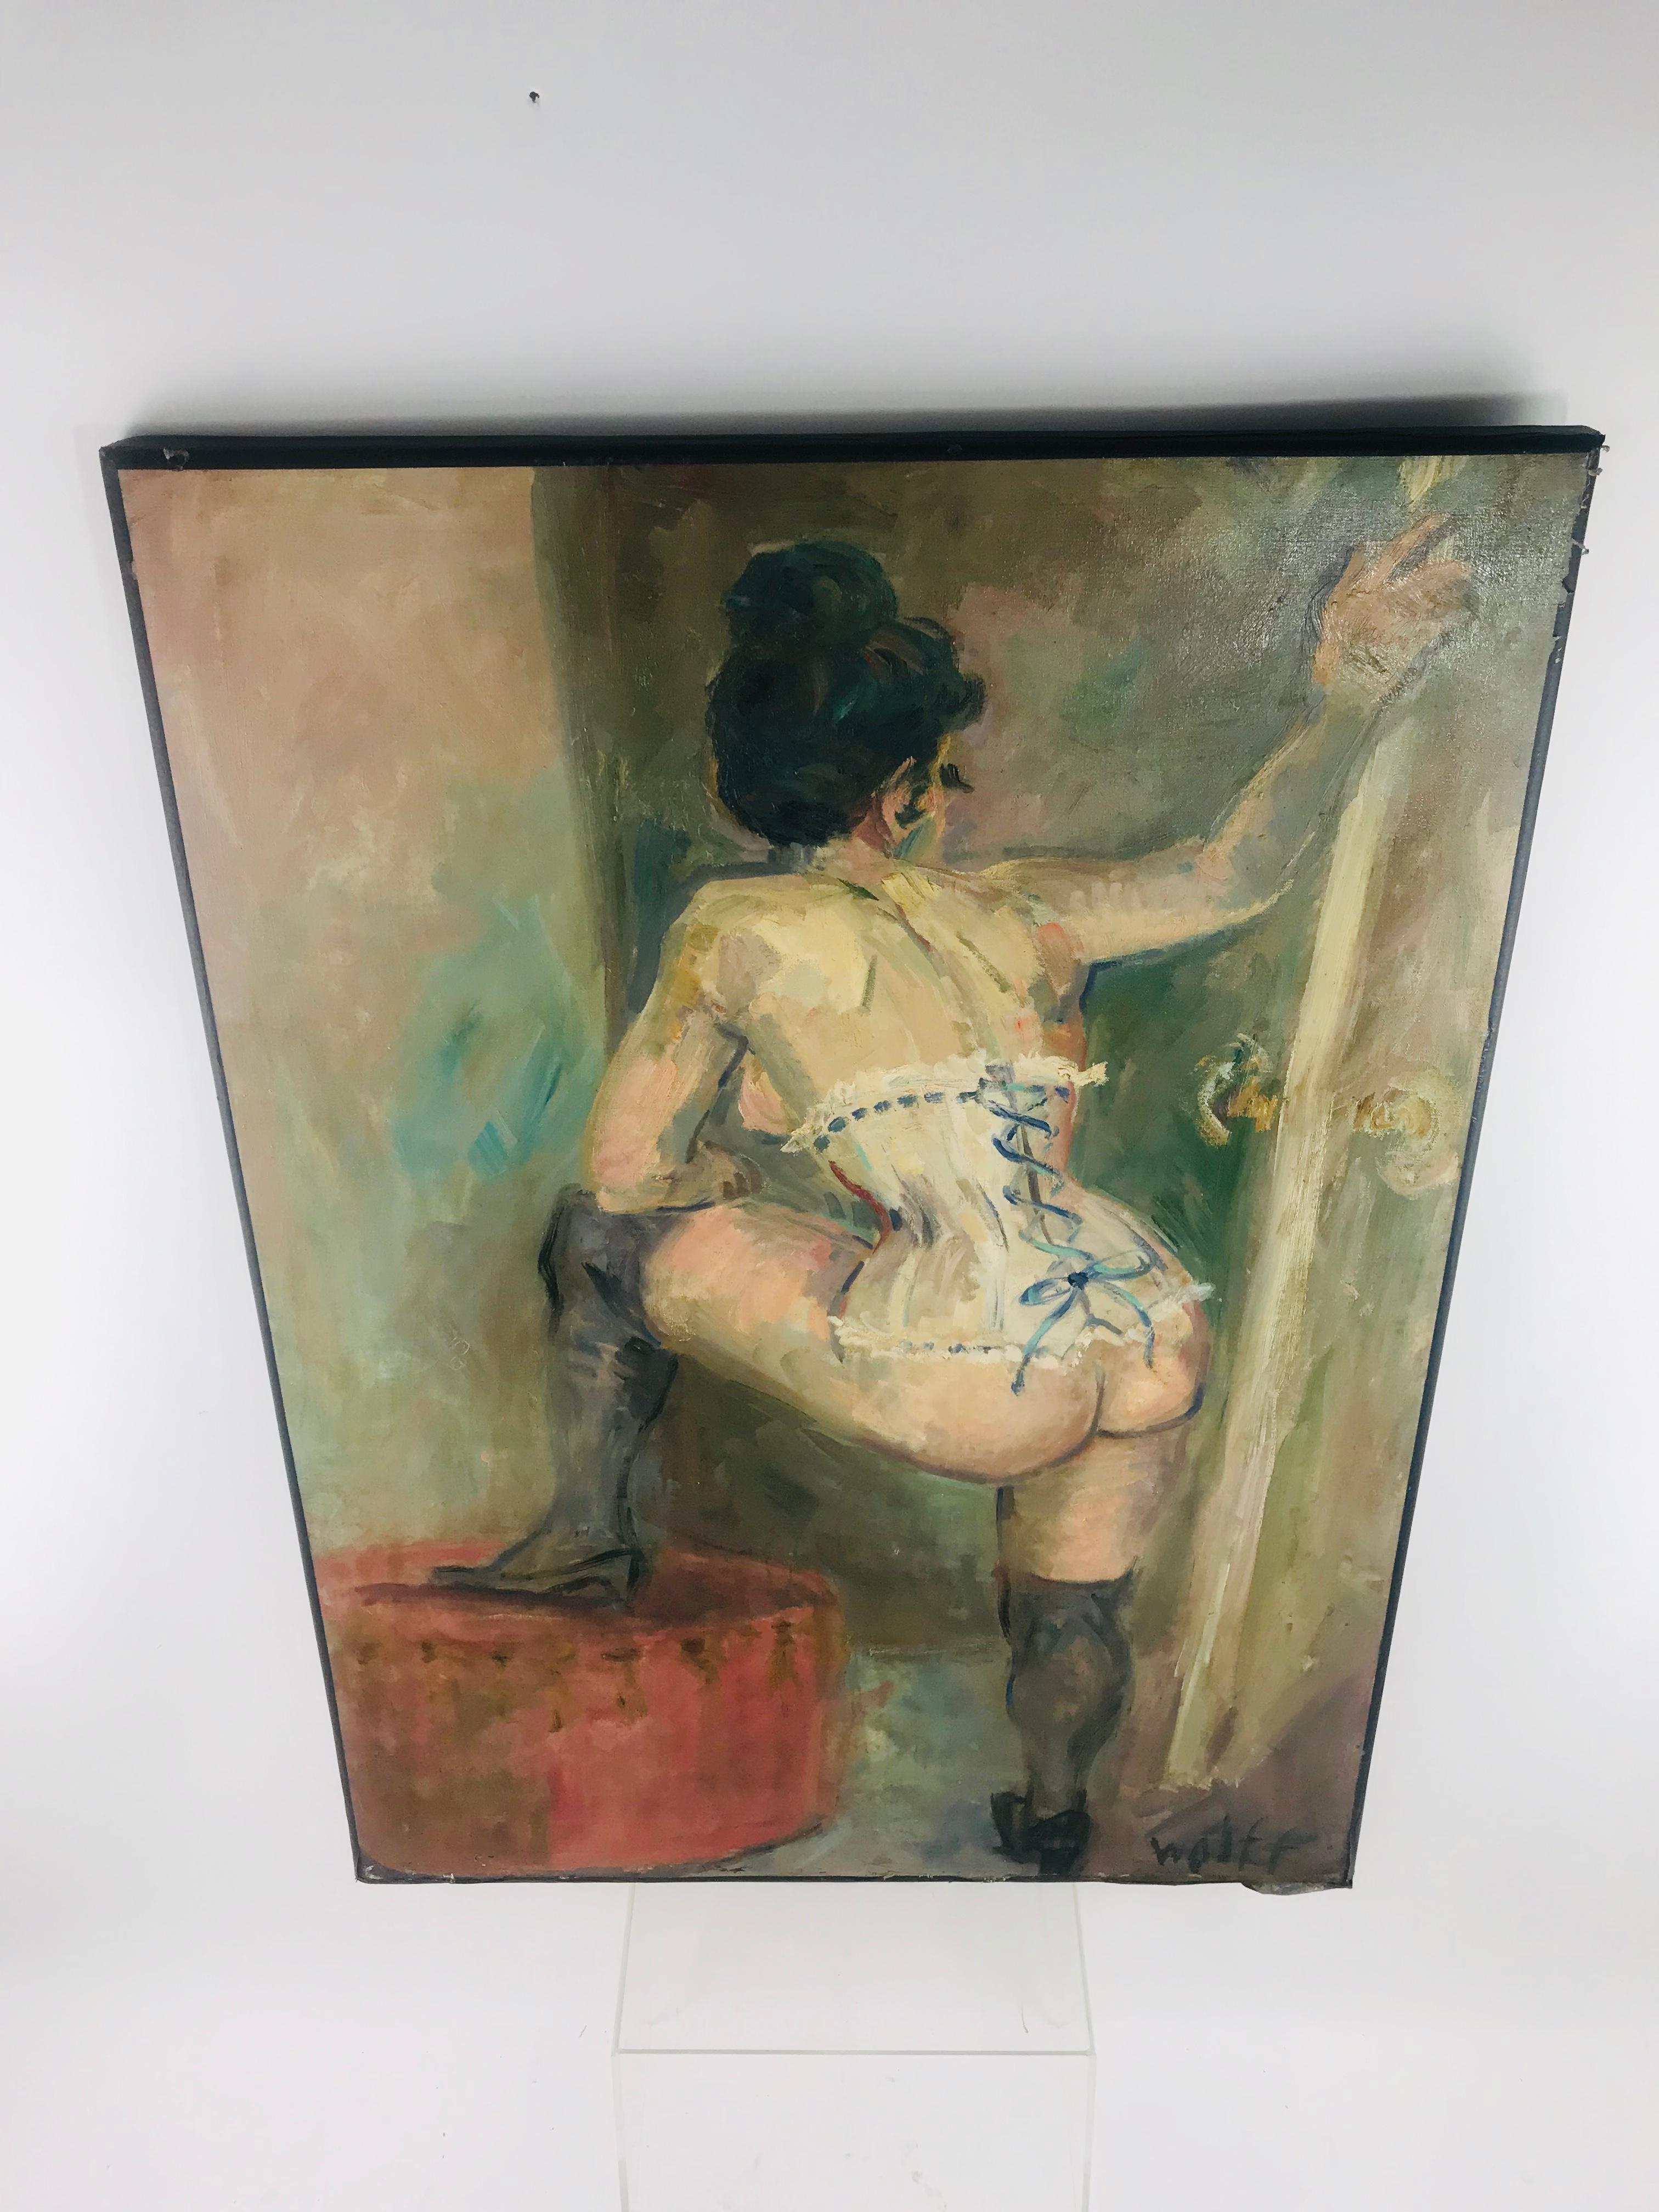 A beautiful signed (signature bottom right) oil on canvas by artist simply known as Wolff. A turn of the century depiction of a bare bottomed woman, wearing only her thigh high leather boots and a garter, although not made clear why or what she is